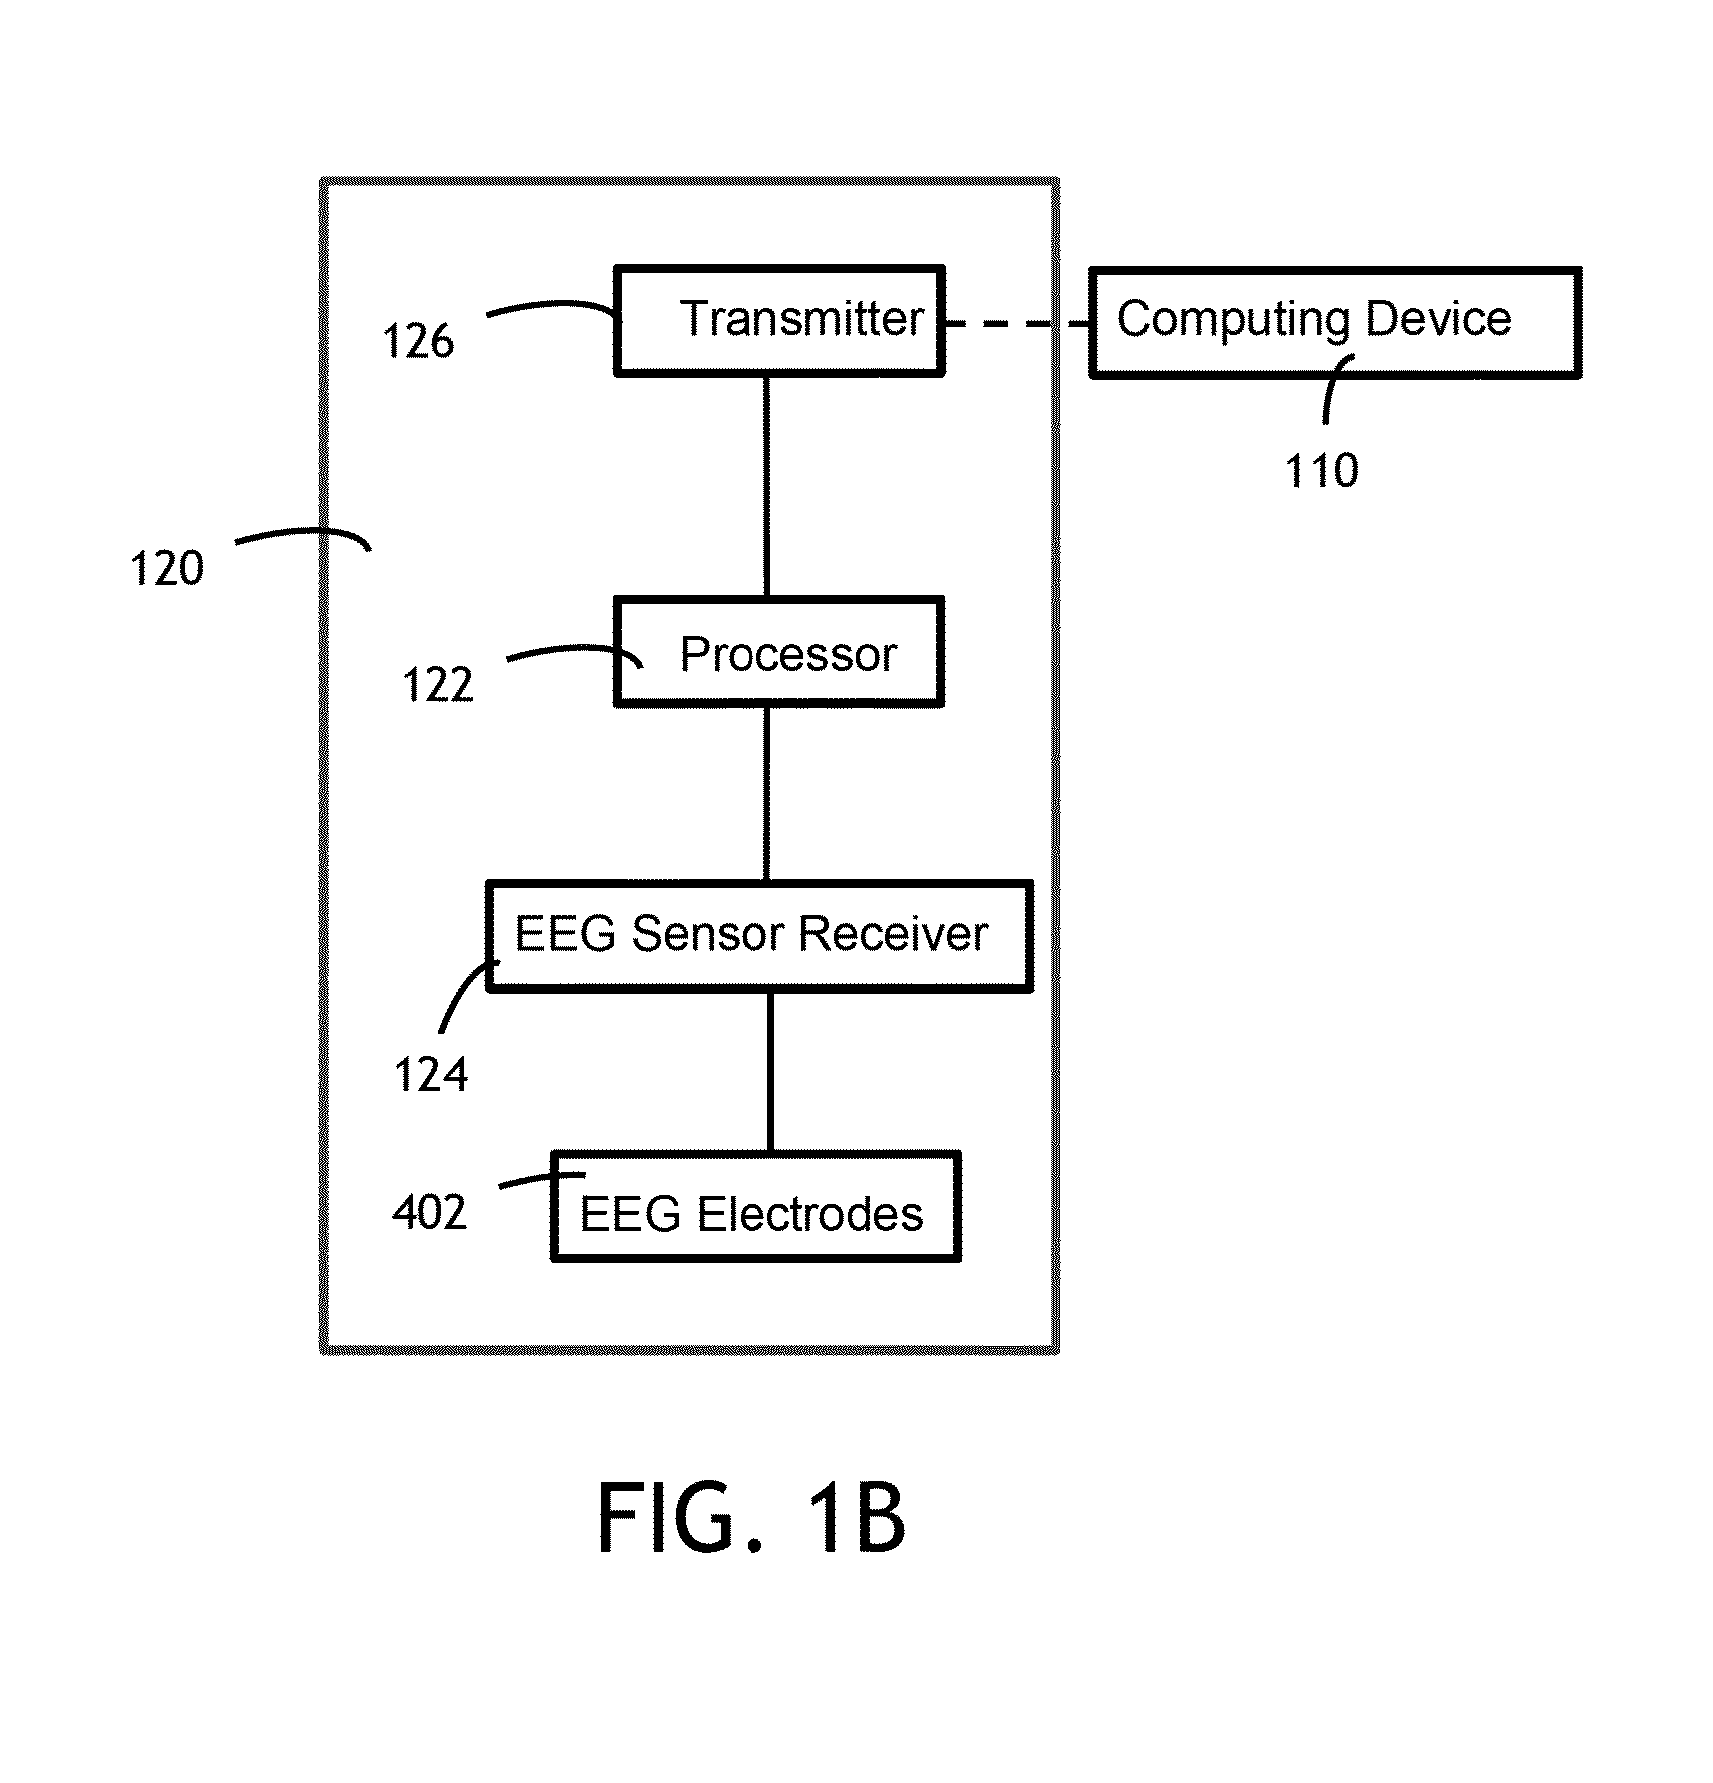 Hands-free electroencephalography display enablement and unlock method and apparatus